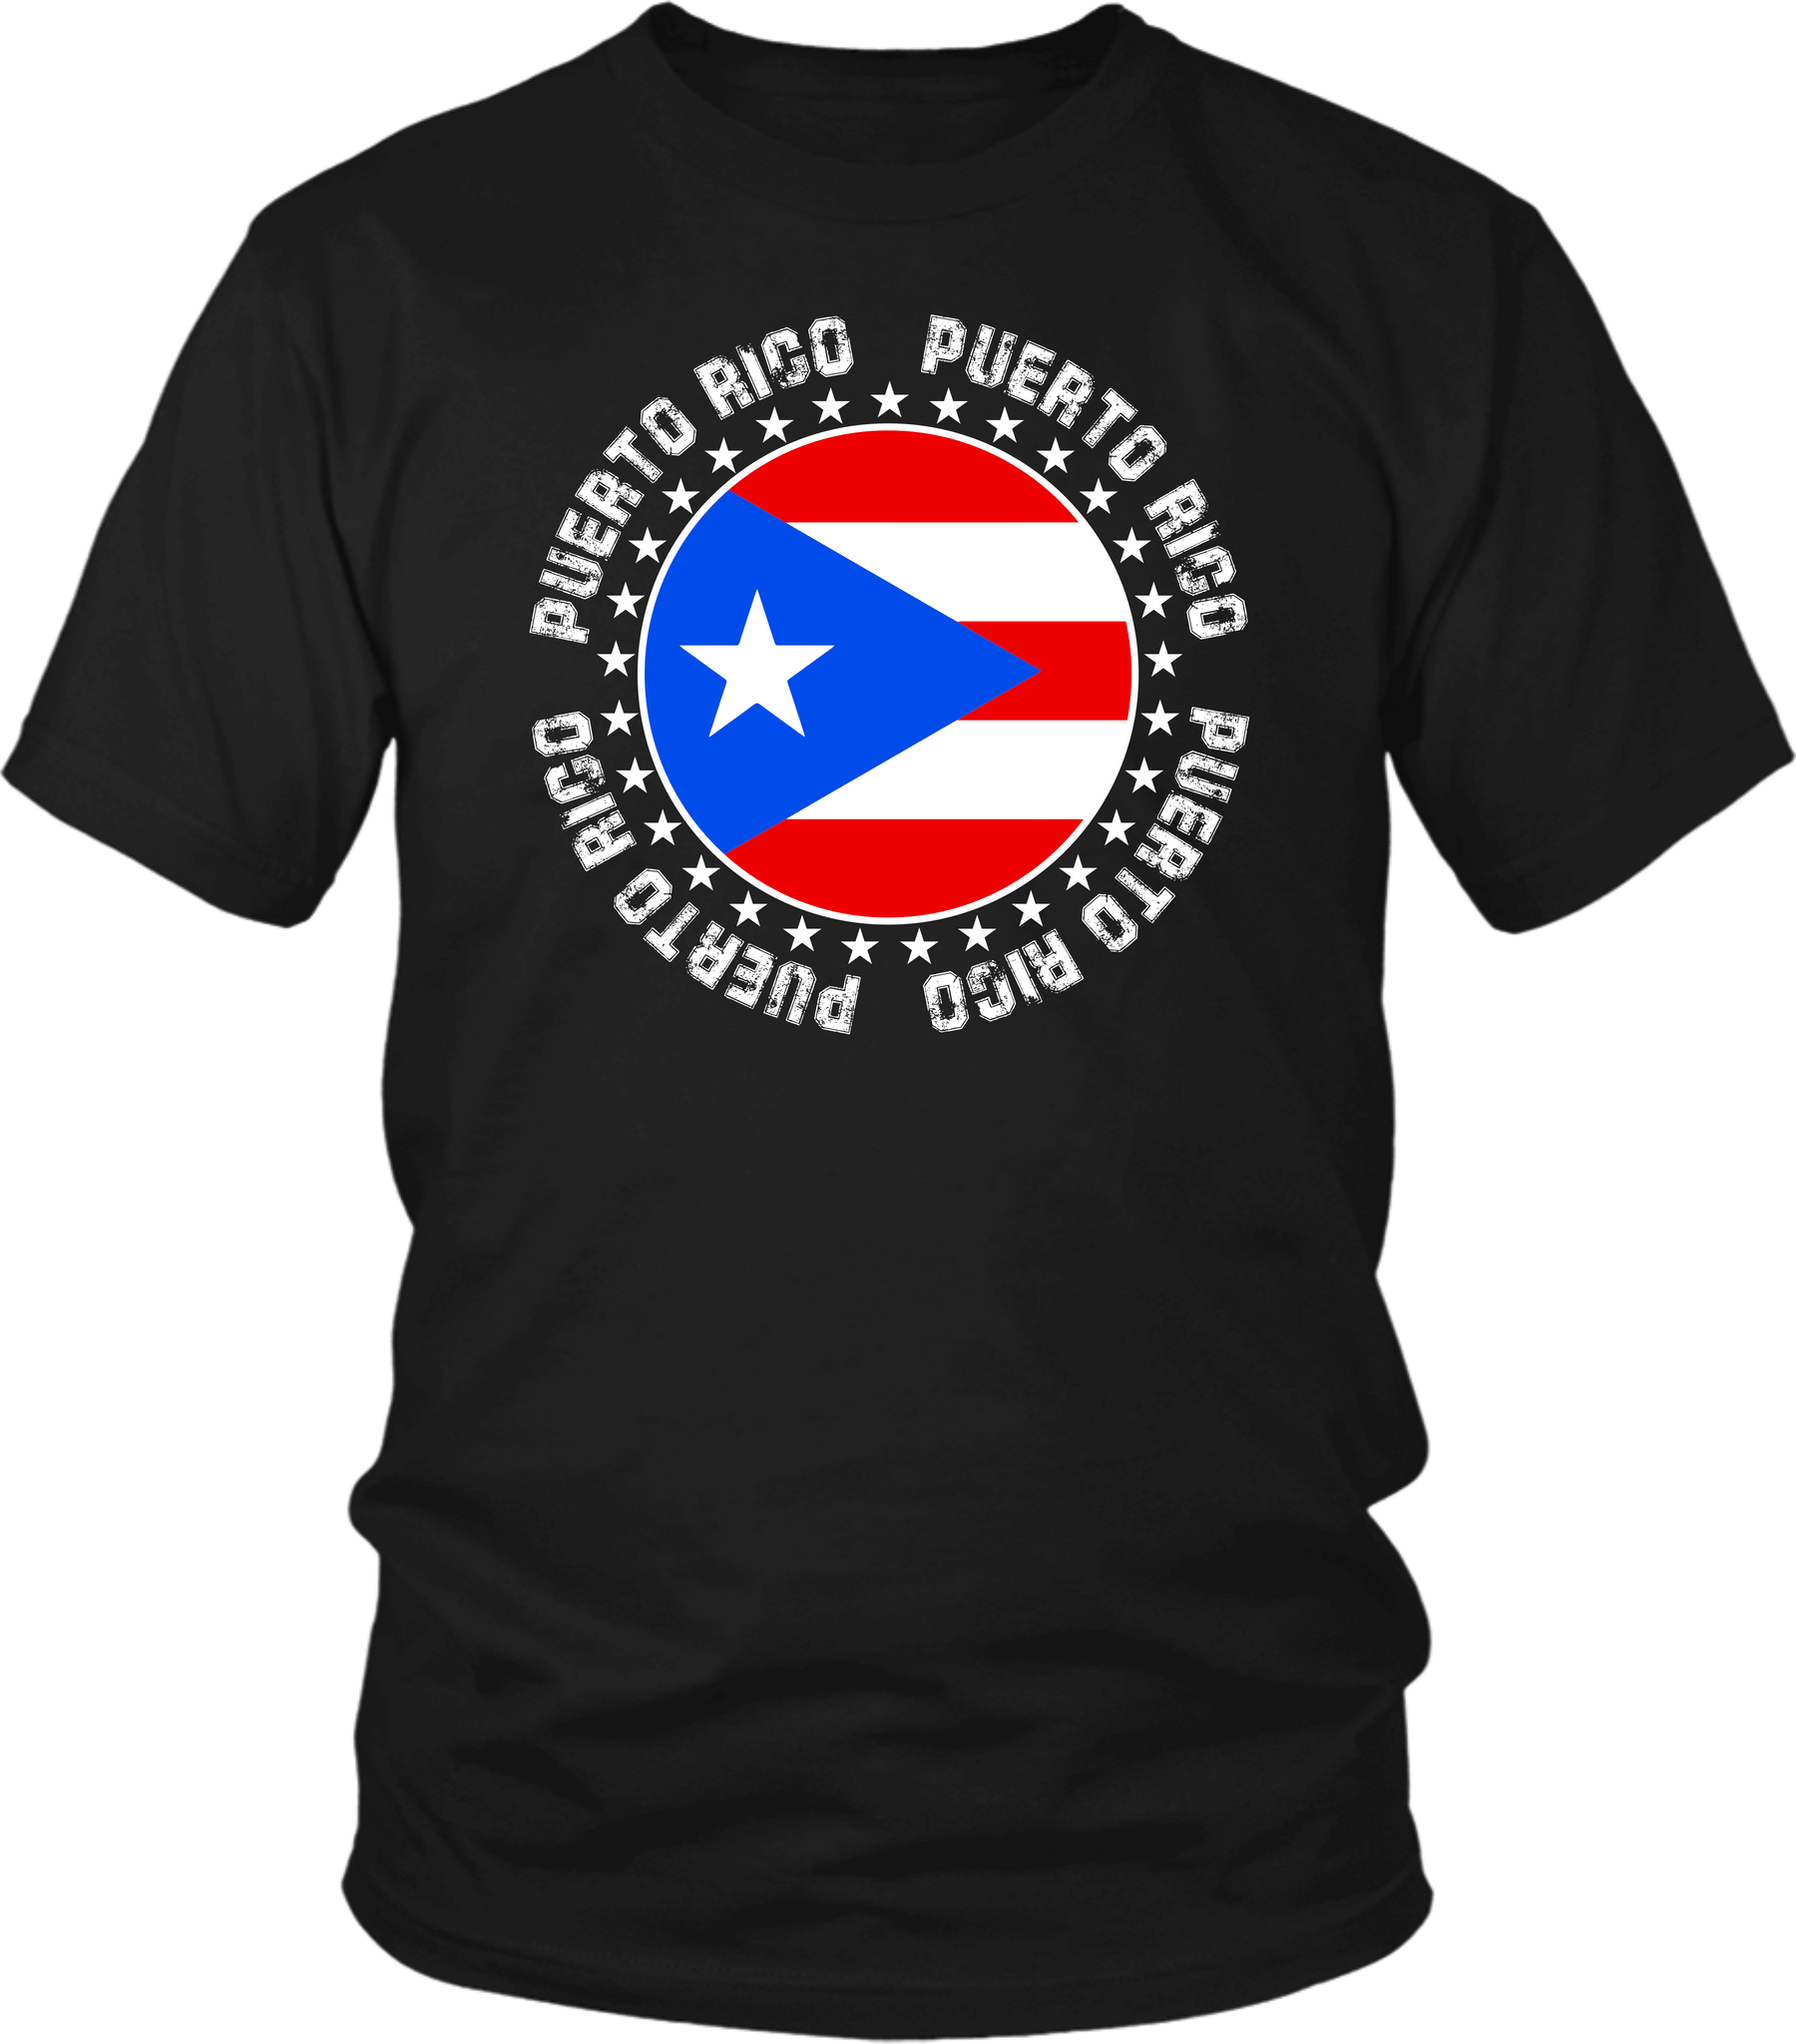 Black T-shirt Mock up with circular Puerto Rican flag, Puerto Rican Spirit T-shirt  Available from the Xpert Apparel Store